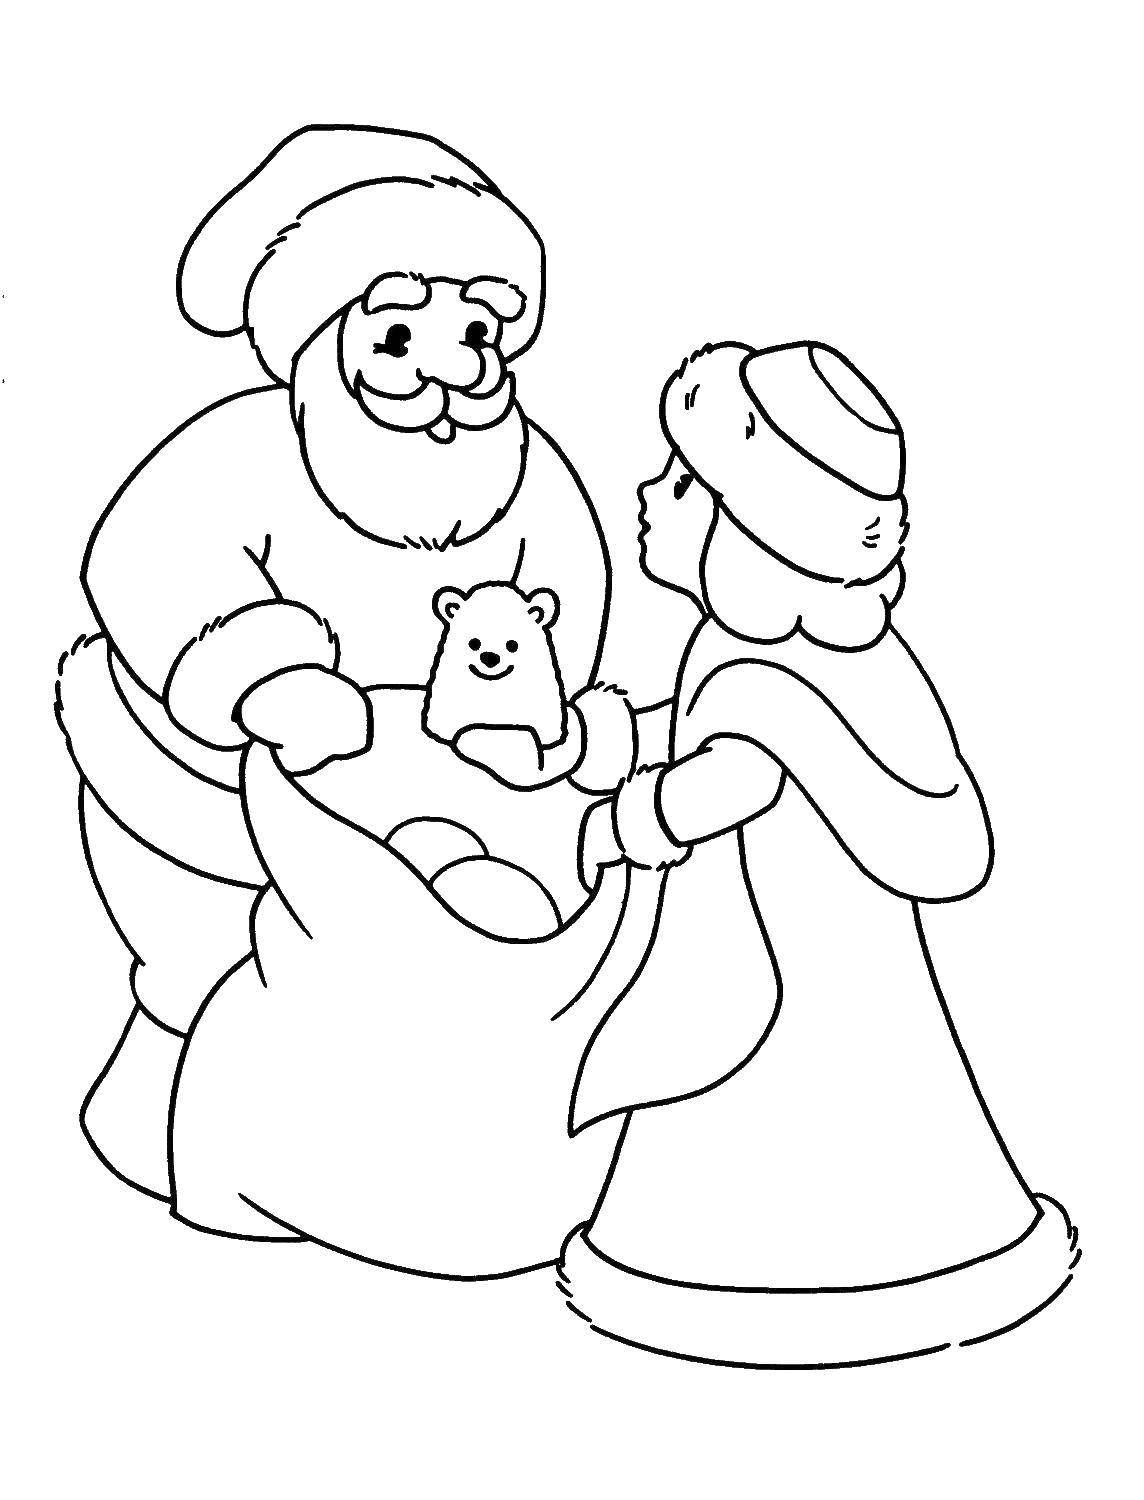 Coloring Santa Claus gets gifts out of the bag. Category Santa Claus. Tags:  New Year, Santa Claus, gifts.